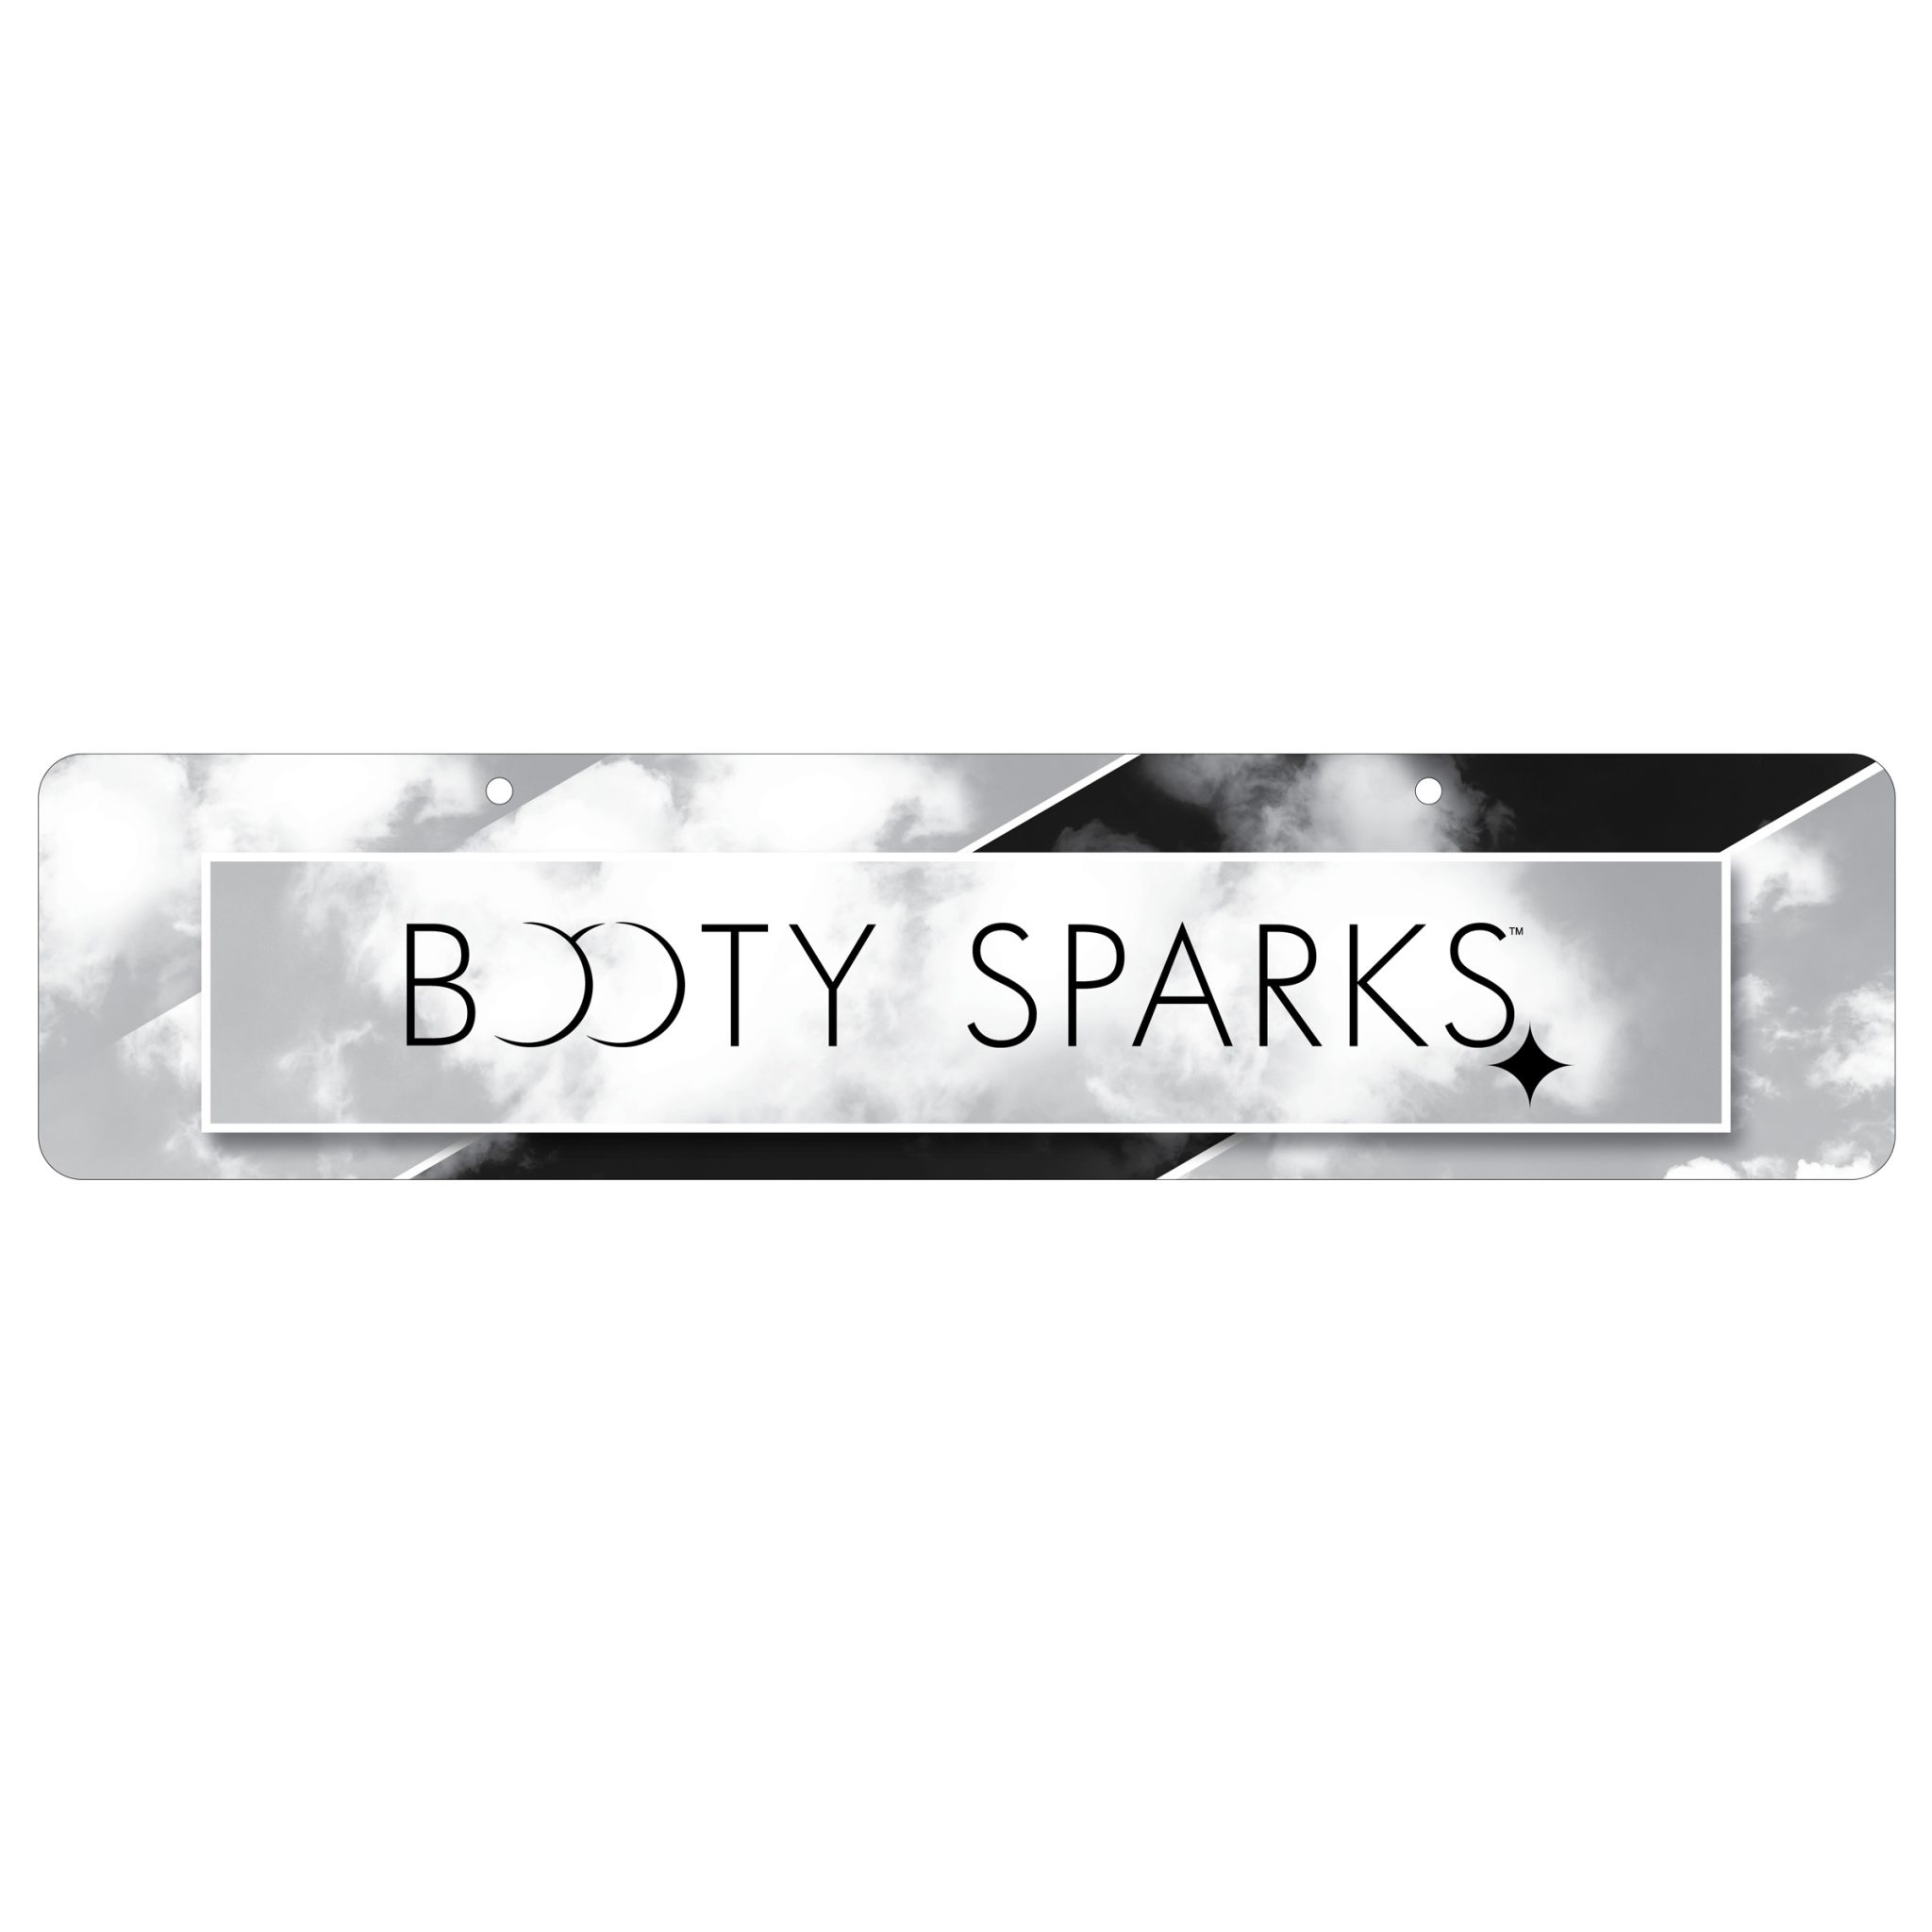 Booty Sparks Display Sign